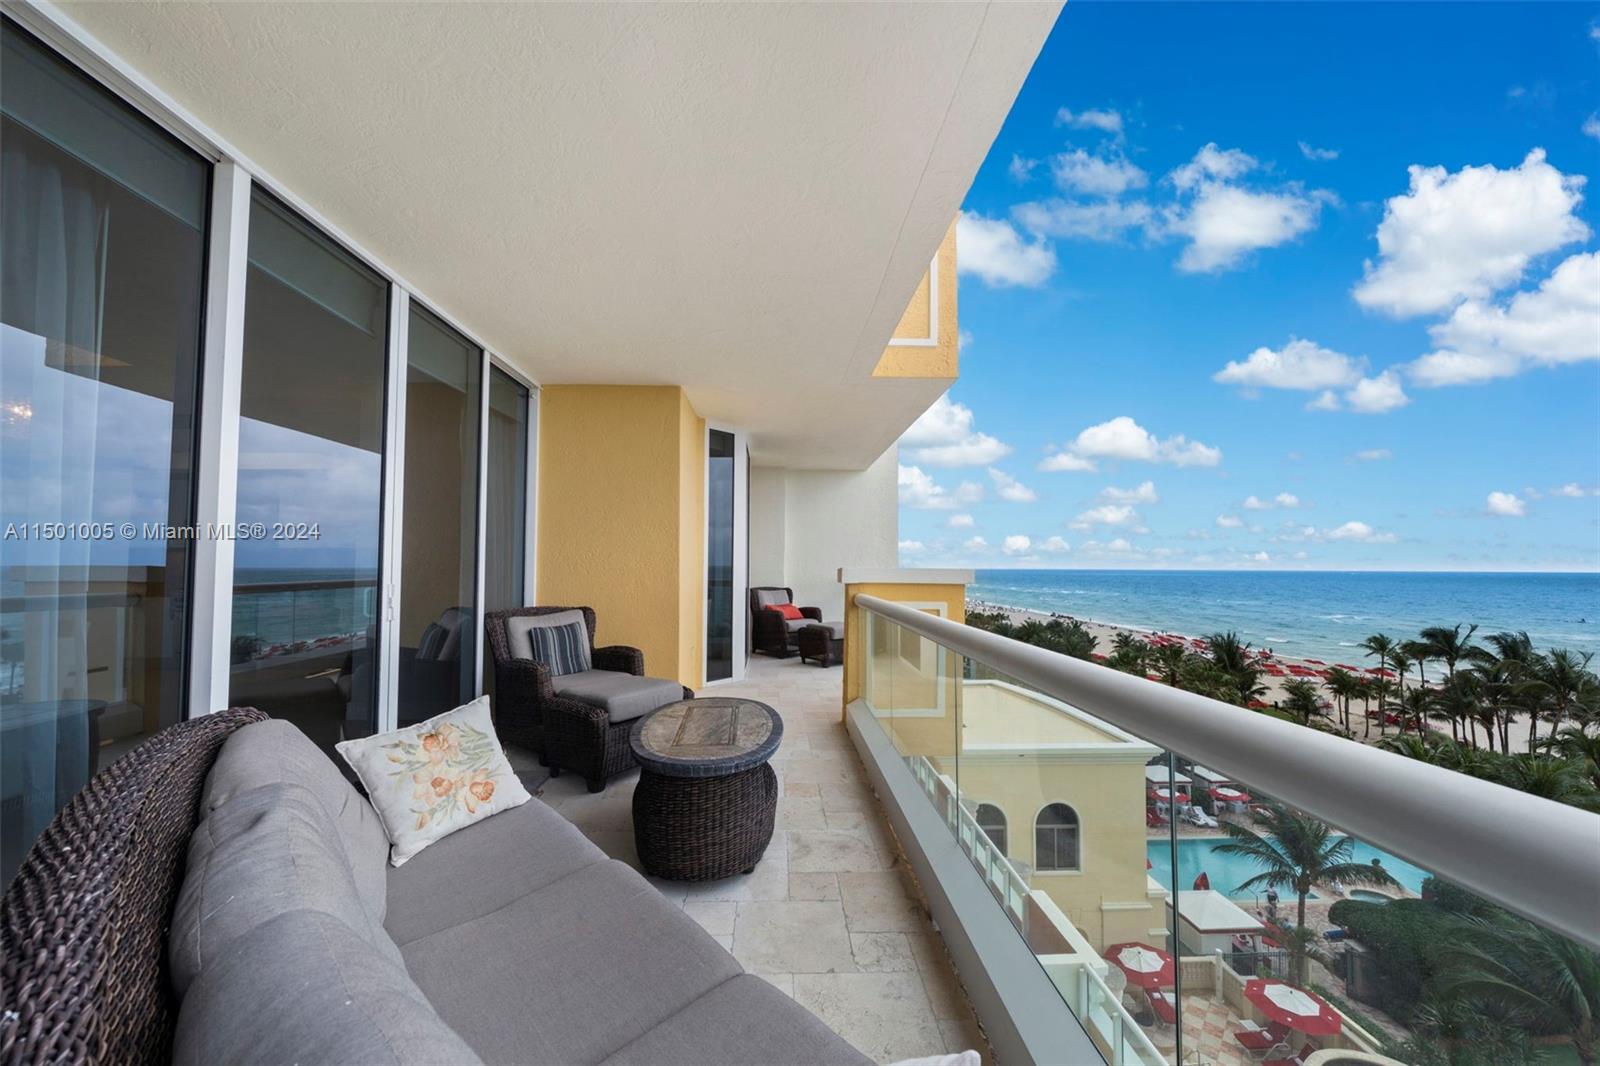 JUST REDUCED - AVAILABLE NOW - renters  needed - Acqualina Resort and Spa is known for its world-class amenities, private beach club, multiple pools, spa and wellness facilities, fitness centers, gourmet dining options, concierge services, and more. Flow thru residence spans the depth of the building, allowing for windows on both sides, direct ocean view and intracoastal. Low floor is in demand, gives you a feel of the home on the ocean overlooking lashes gardens and pools. Newly remodeled, new kitchen, clean and perfect for move in: 3b/3b large fully furnished residence. Location, Accommodations, Amenities, Service and Hospitality, Residential Living, Recognition.